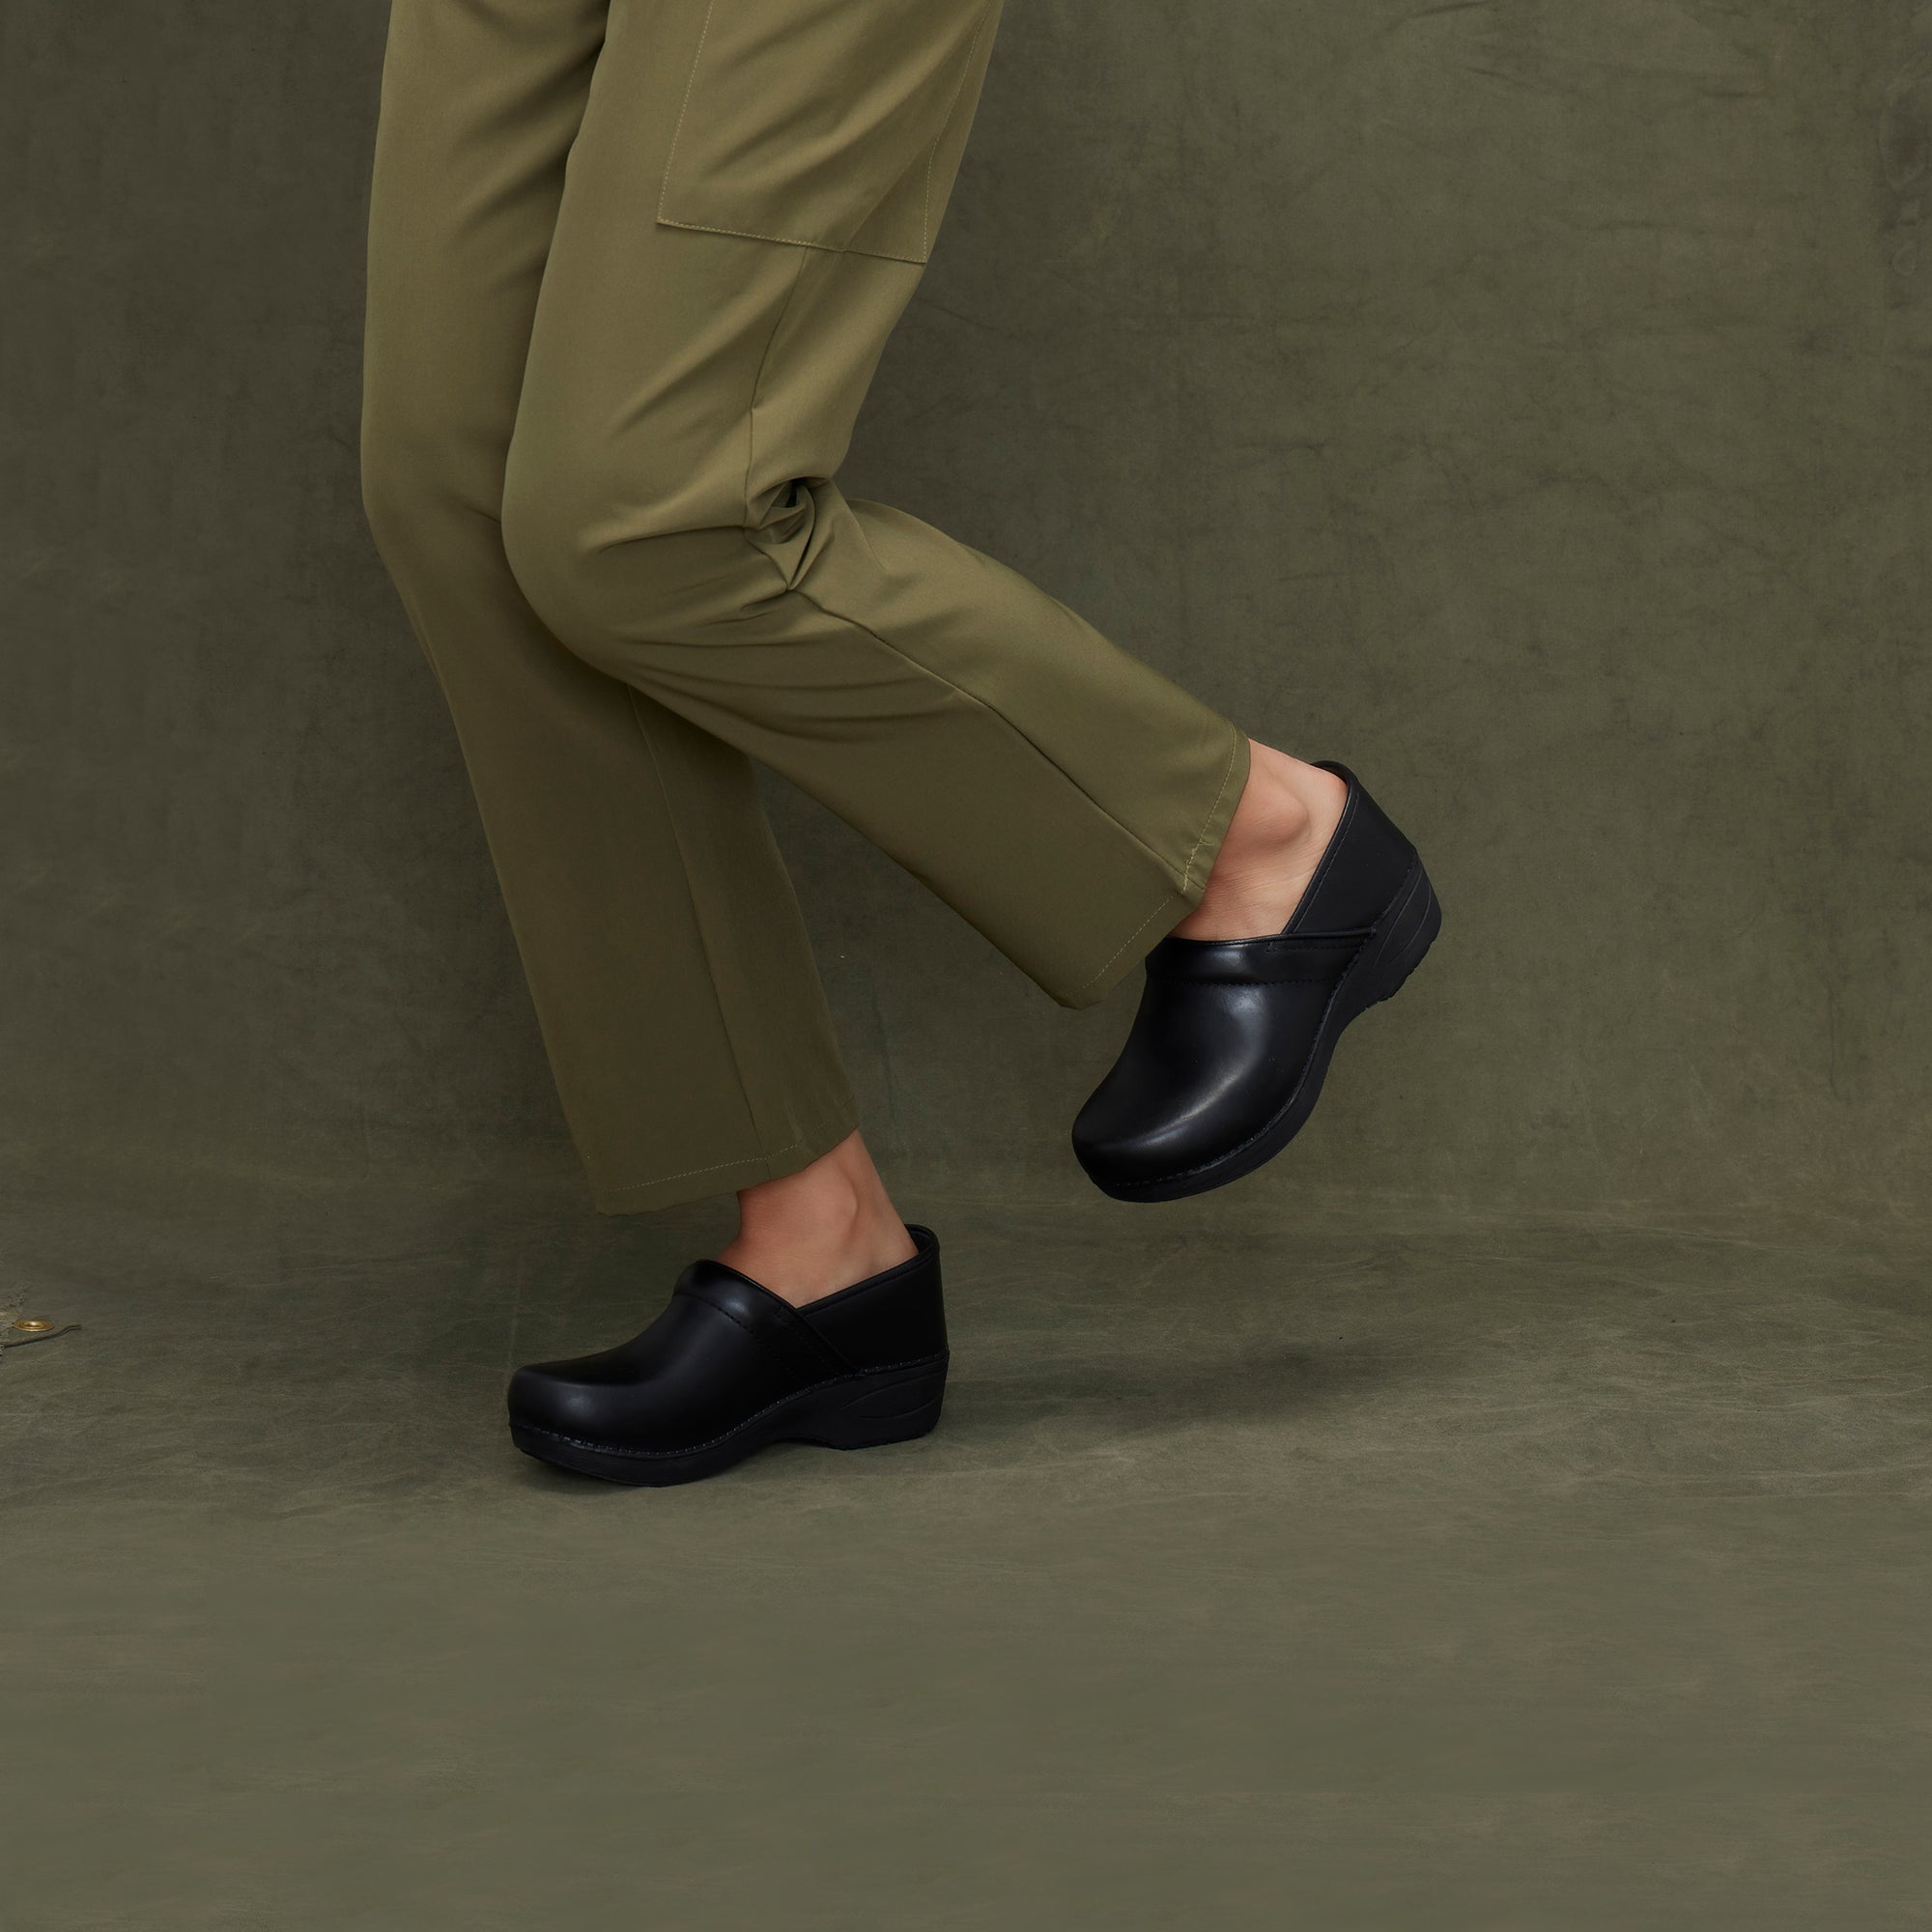 Classic black clogs shown on foot.